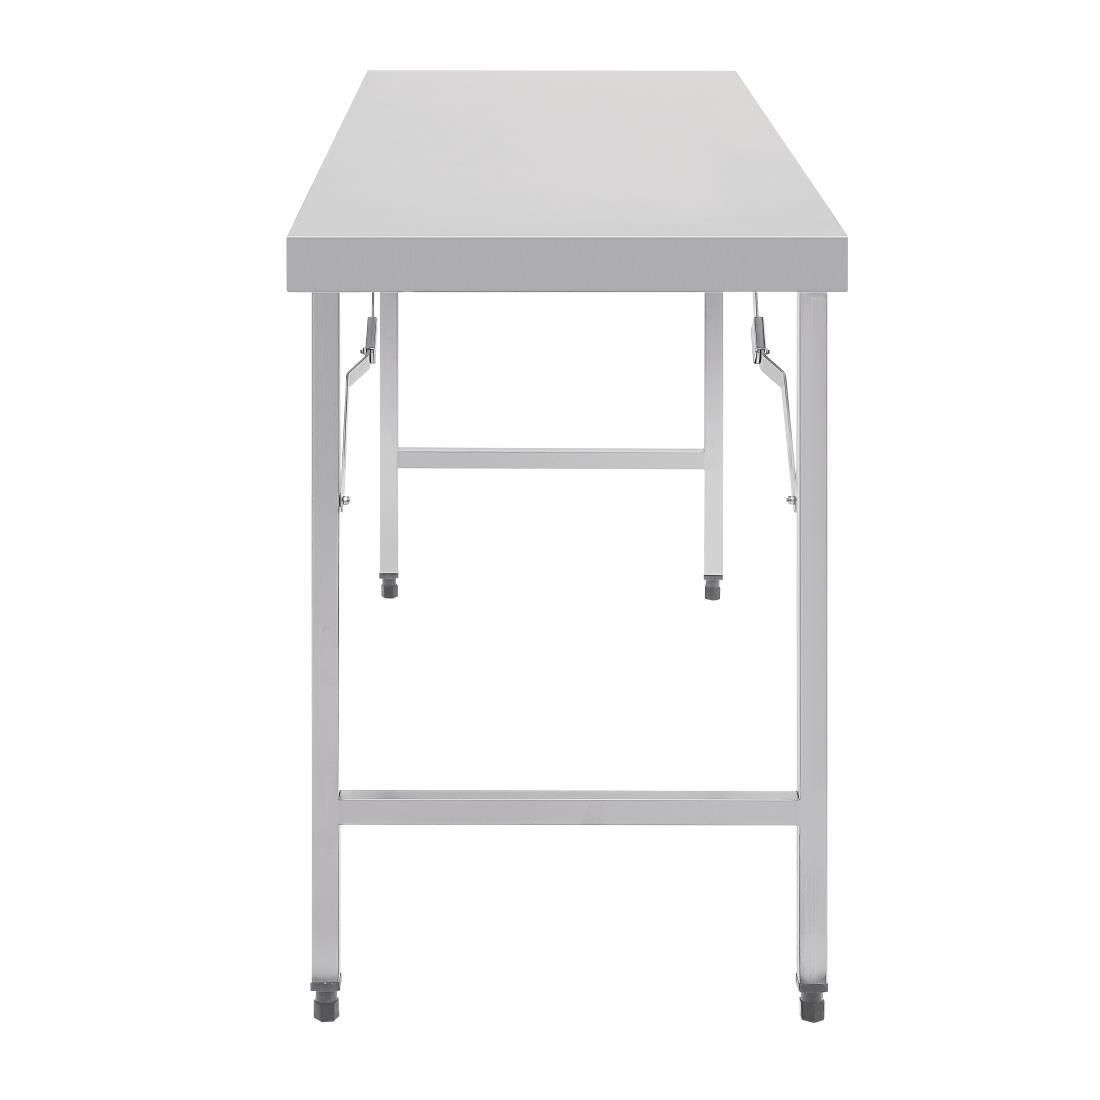 Vogue Stainless Steel Folding Table 1800mm - CB906  - 4